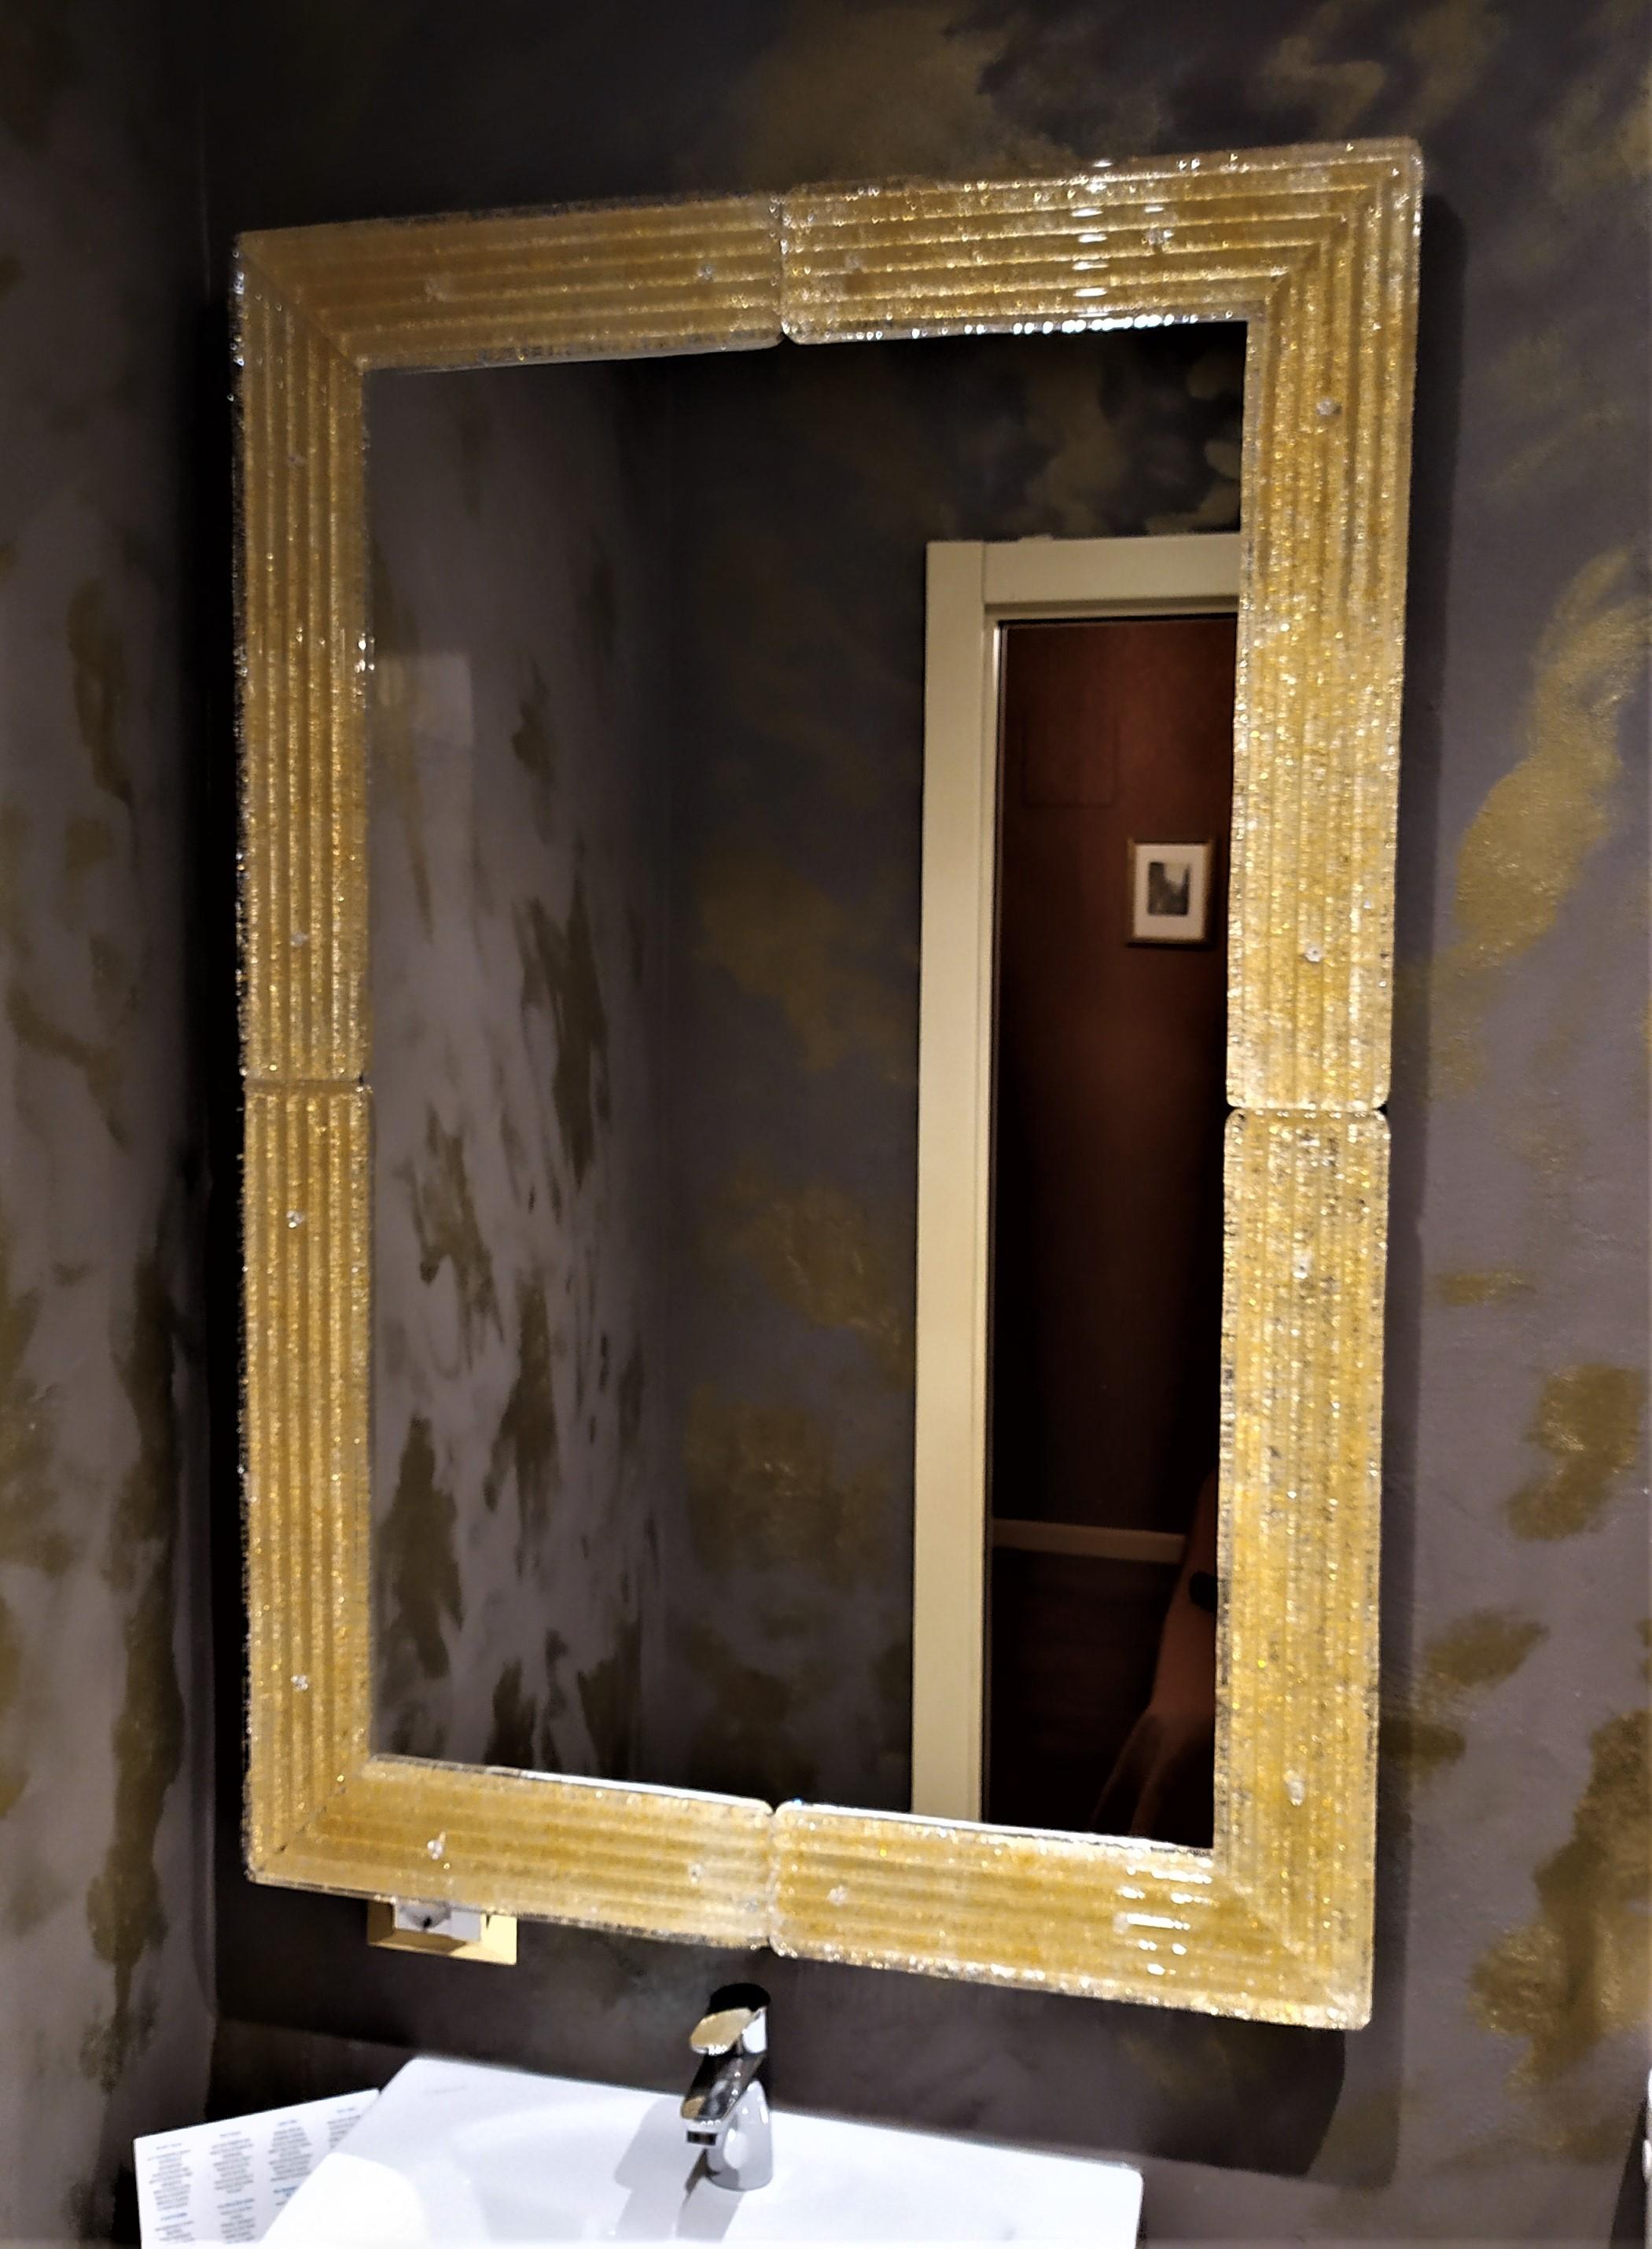 Contemporary style mirror of the 21st century, with the luxurious murano glass frame produced according to the ancient Muranese traditions and processes, frame wich is then cut, shaped and polished in the corners, drilled and fixed to the structure